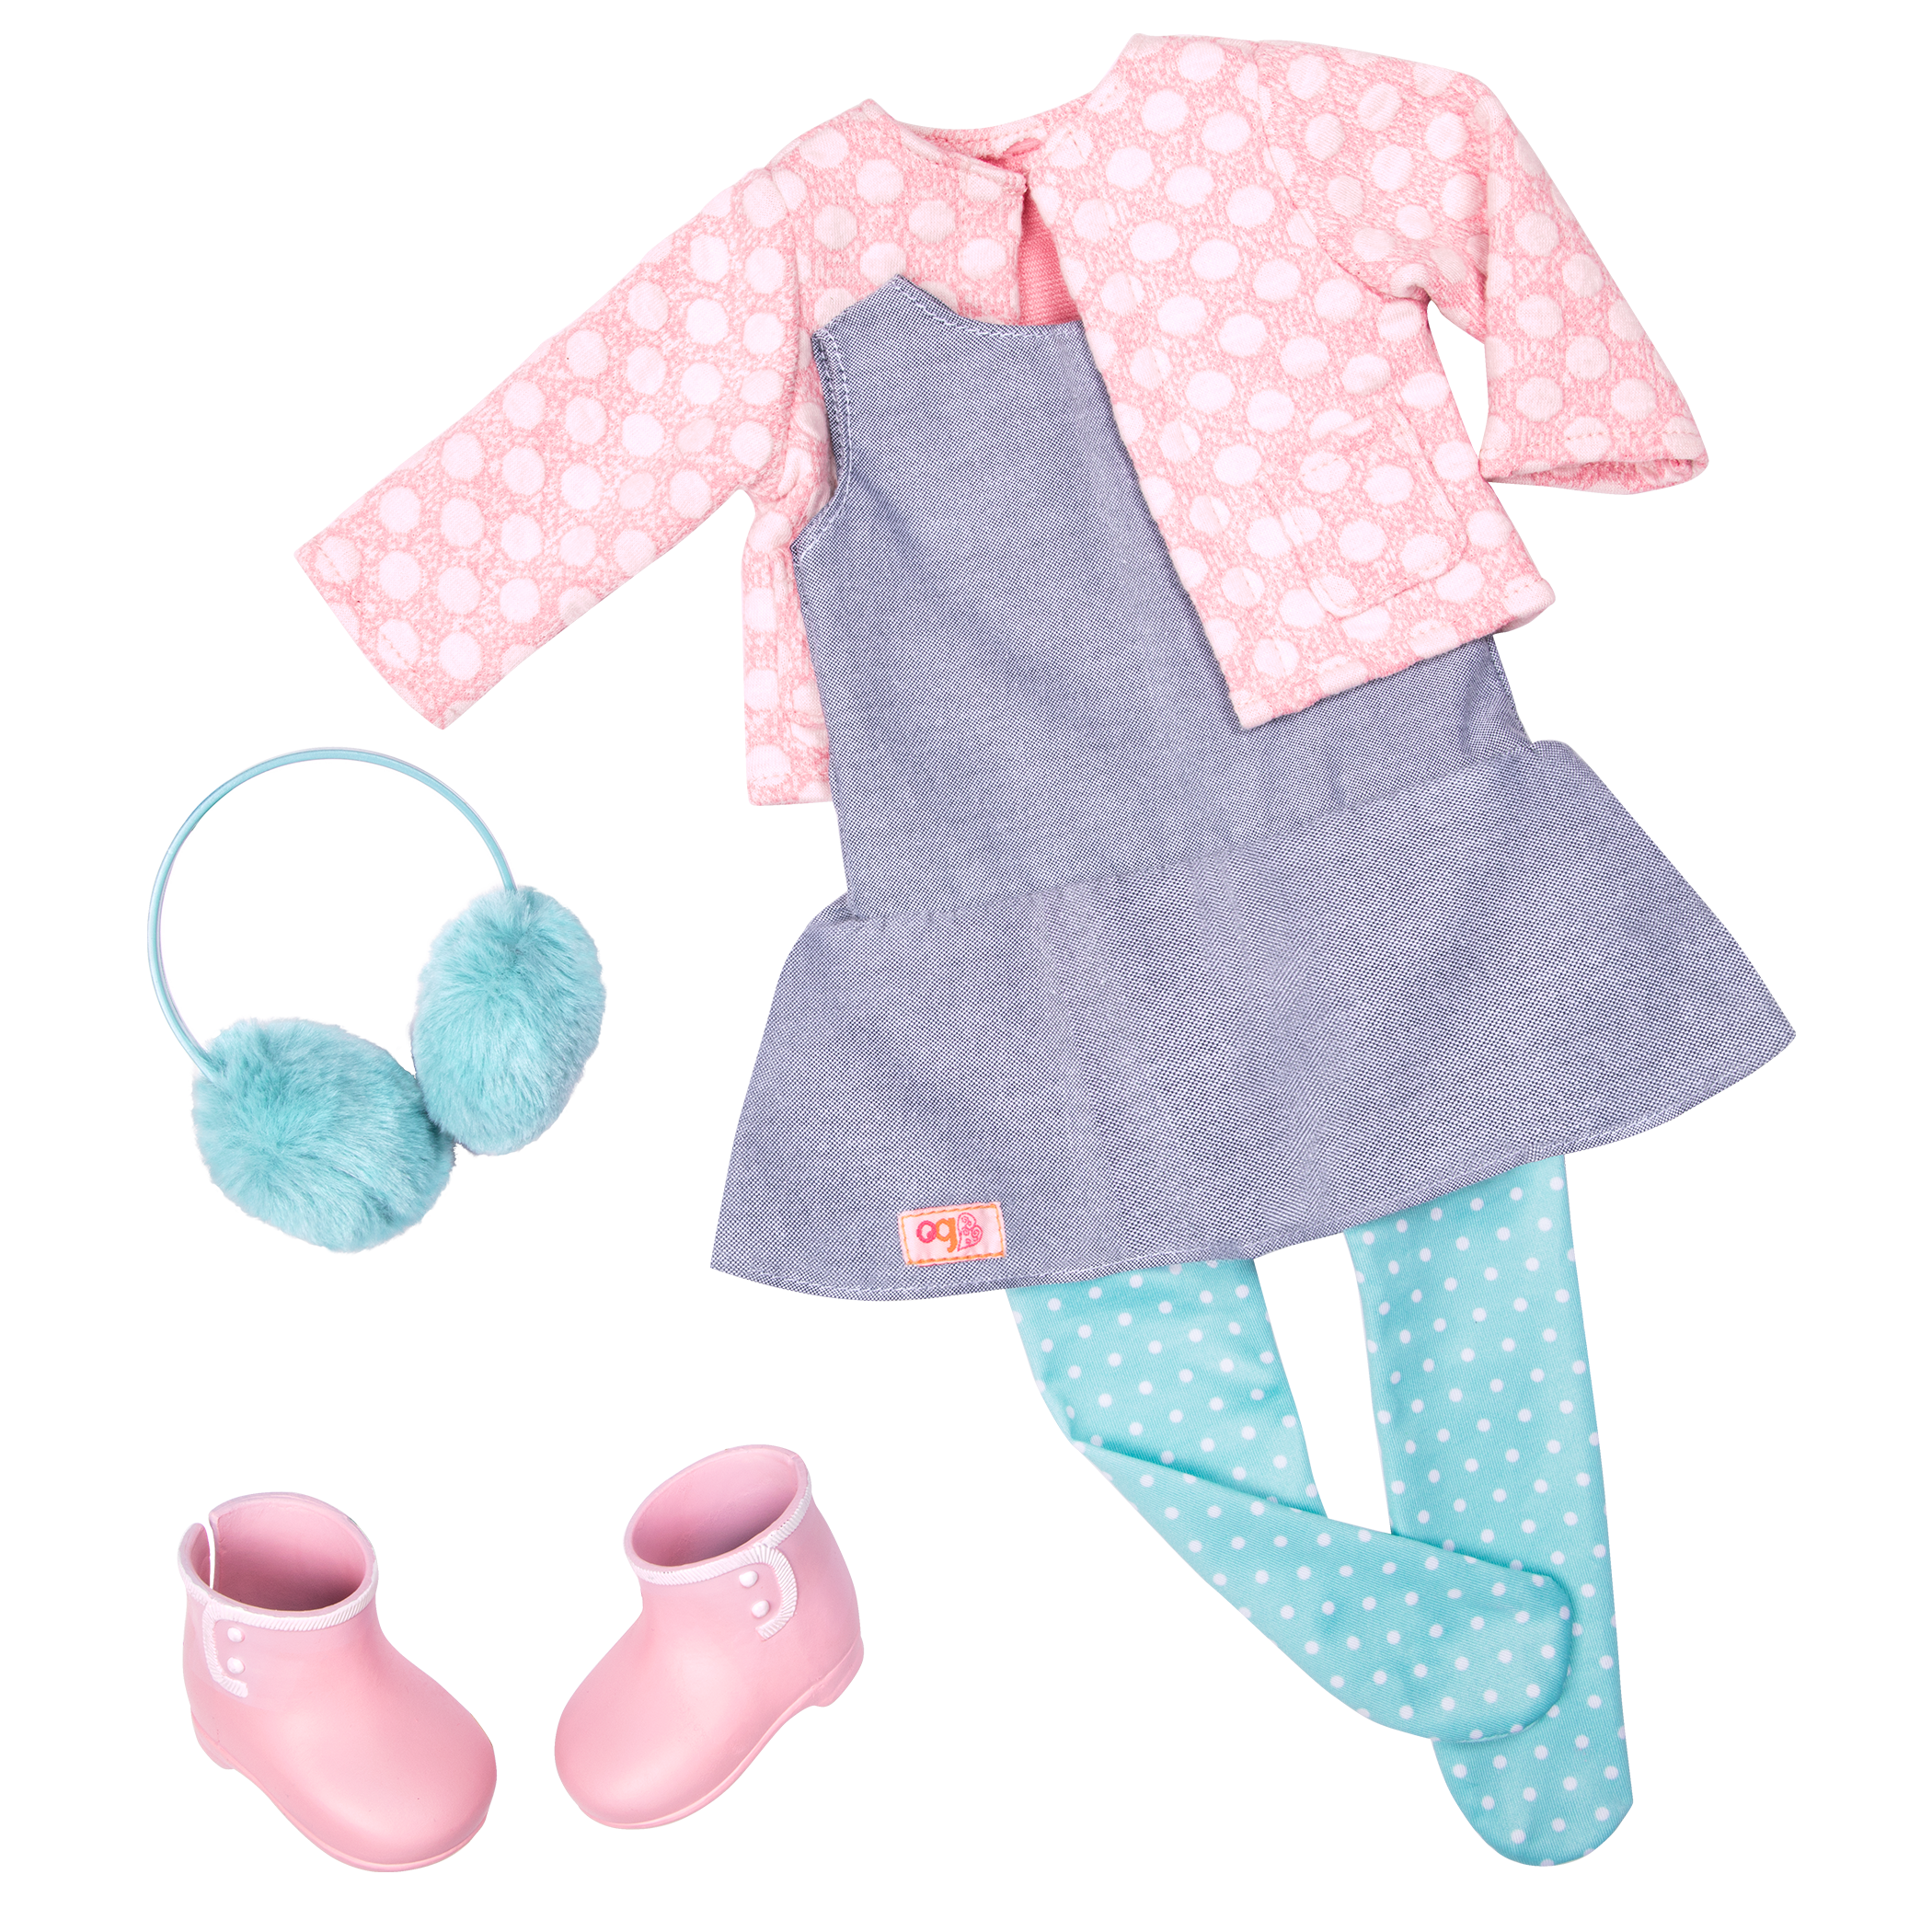 Frosty Fashion outfit for 18-inch dolls